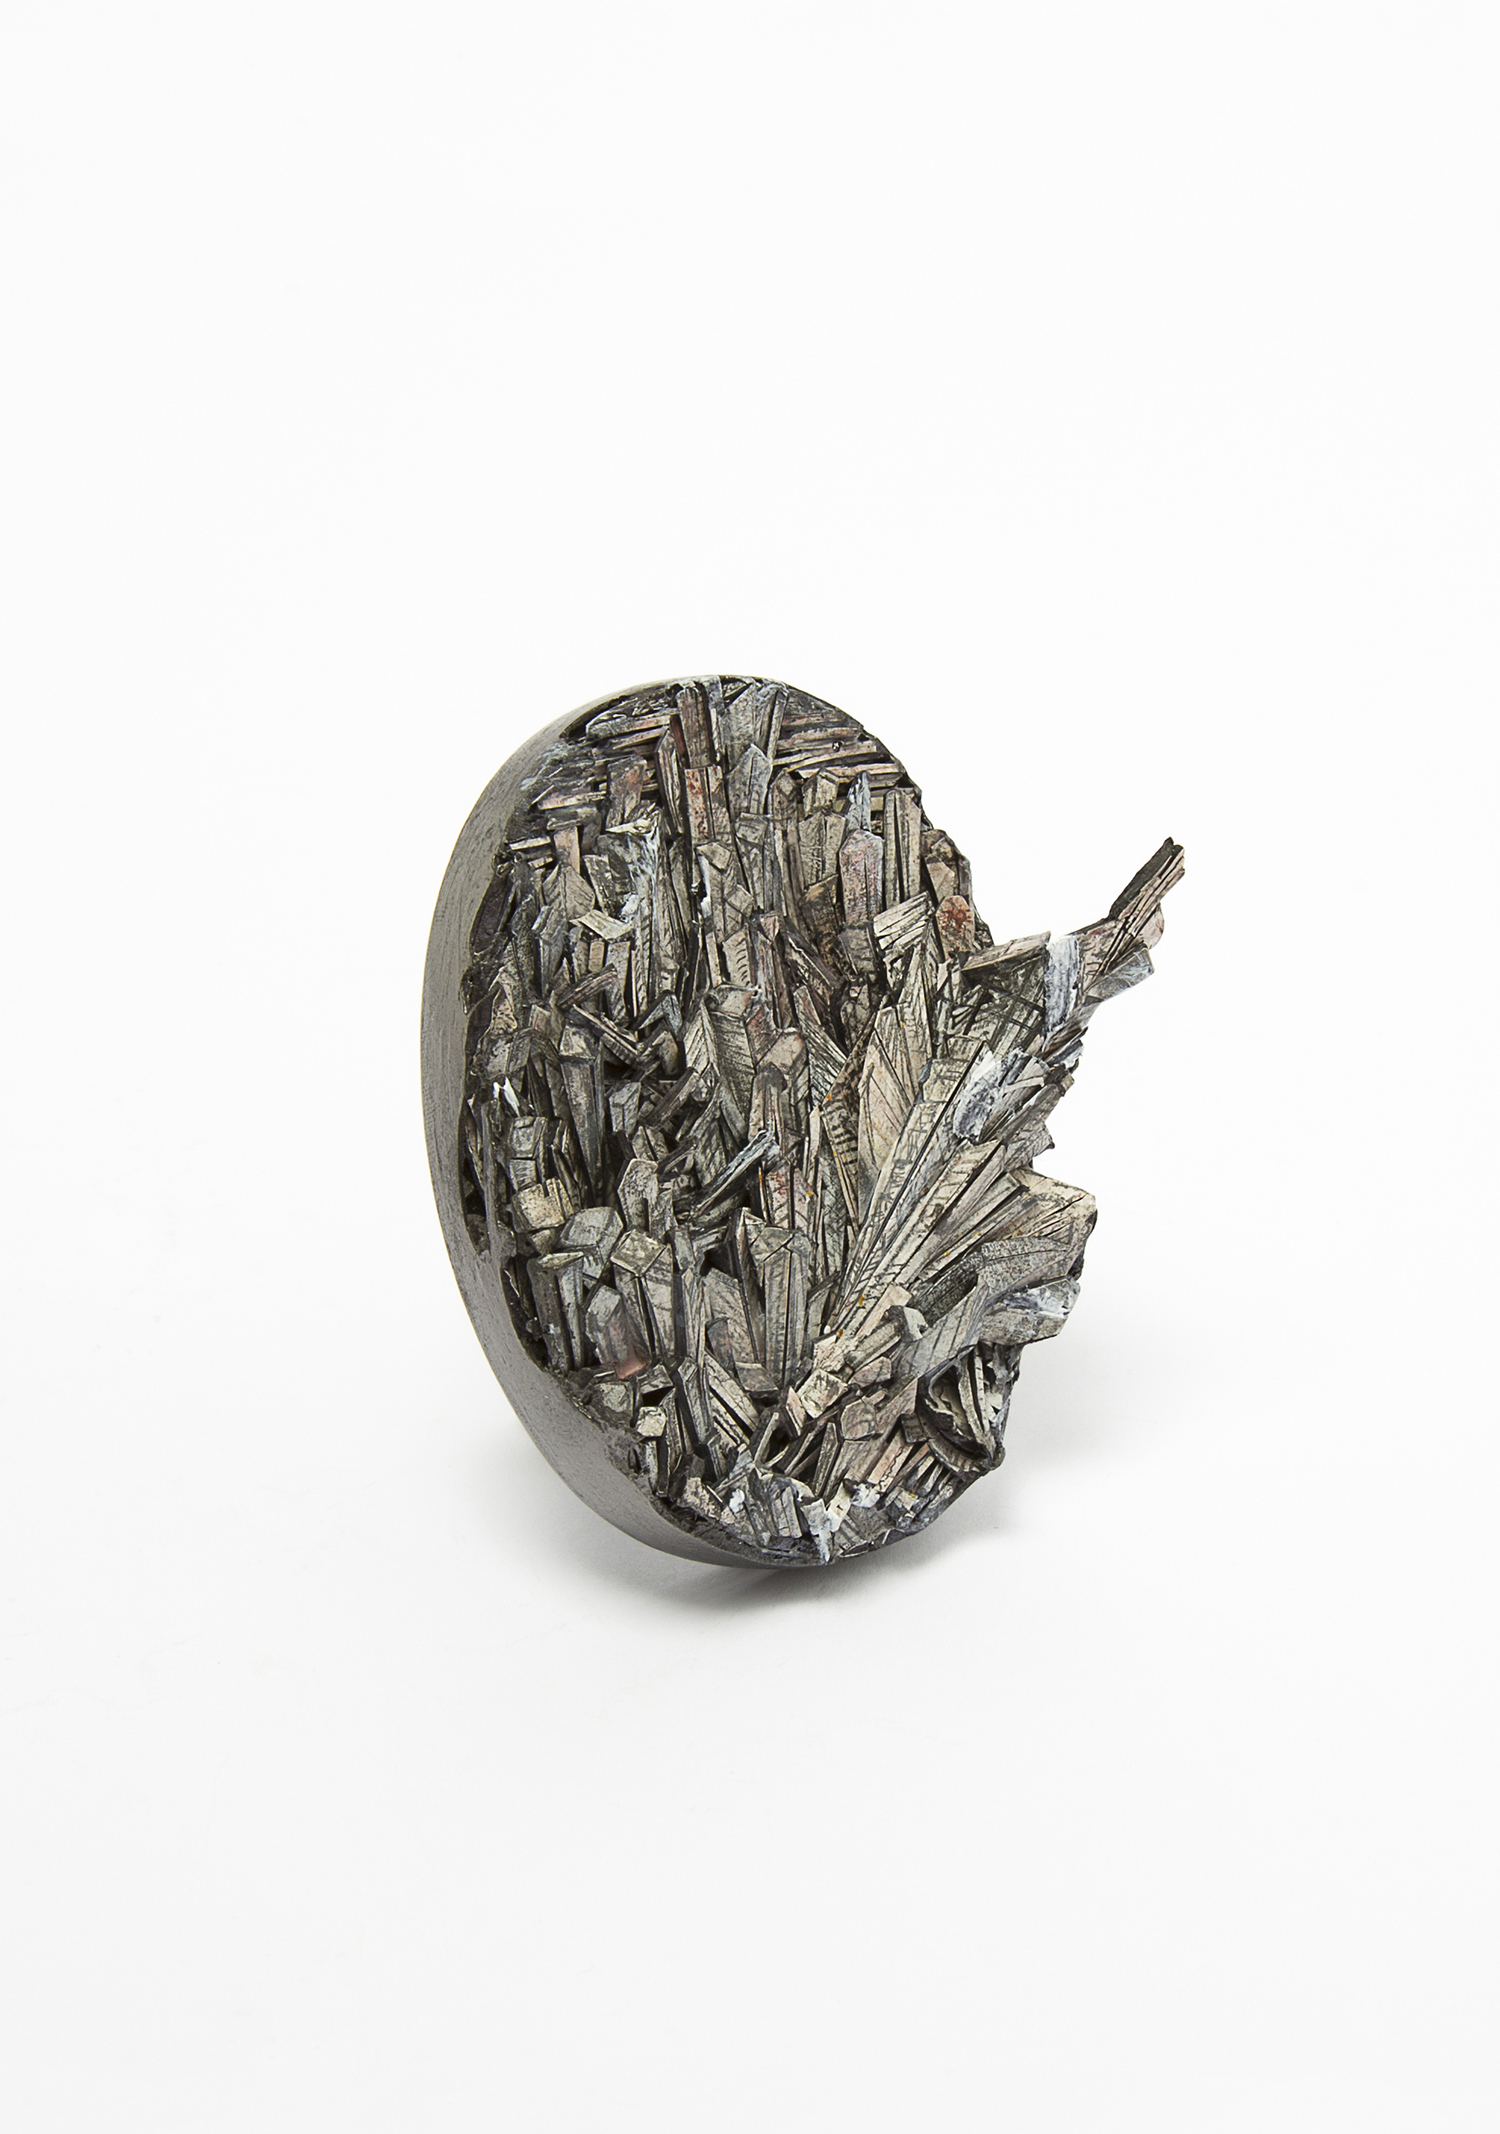 Untitled | Brooch | 2016 | Paper, paint, silver, wood, graphite, stainless steel | 80X65X25mm